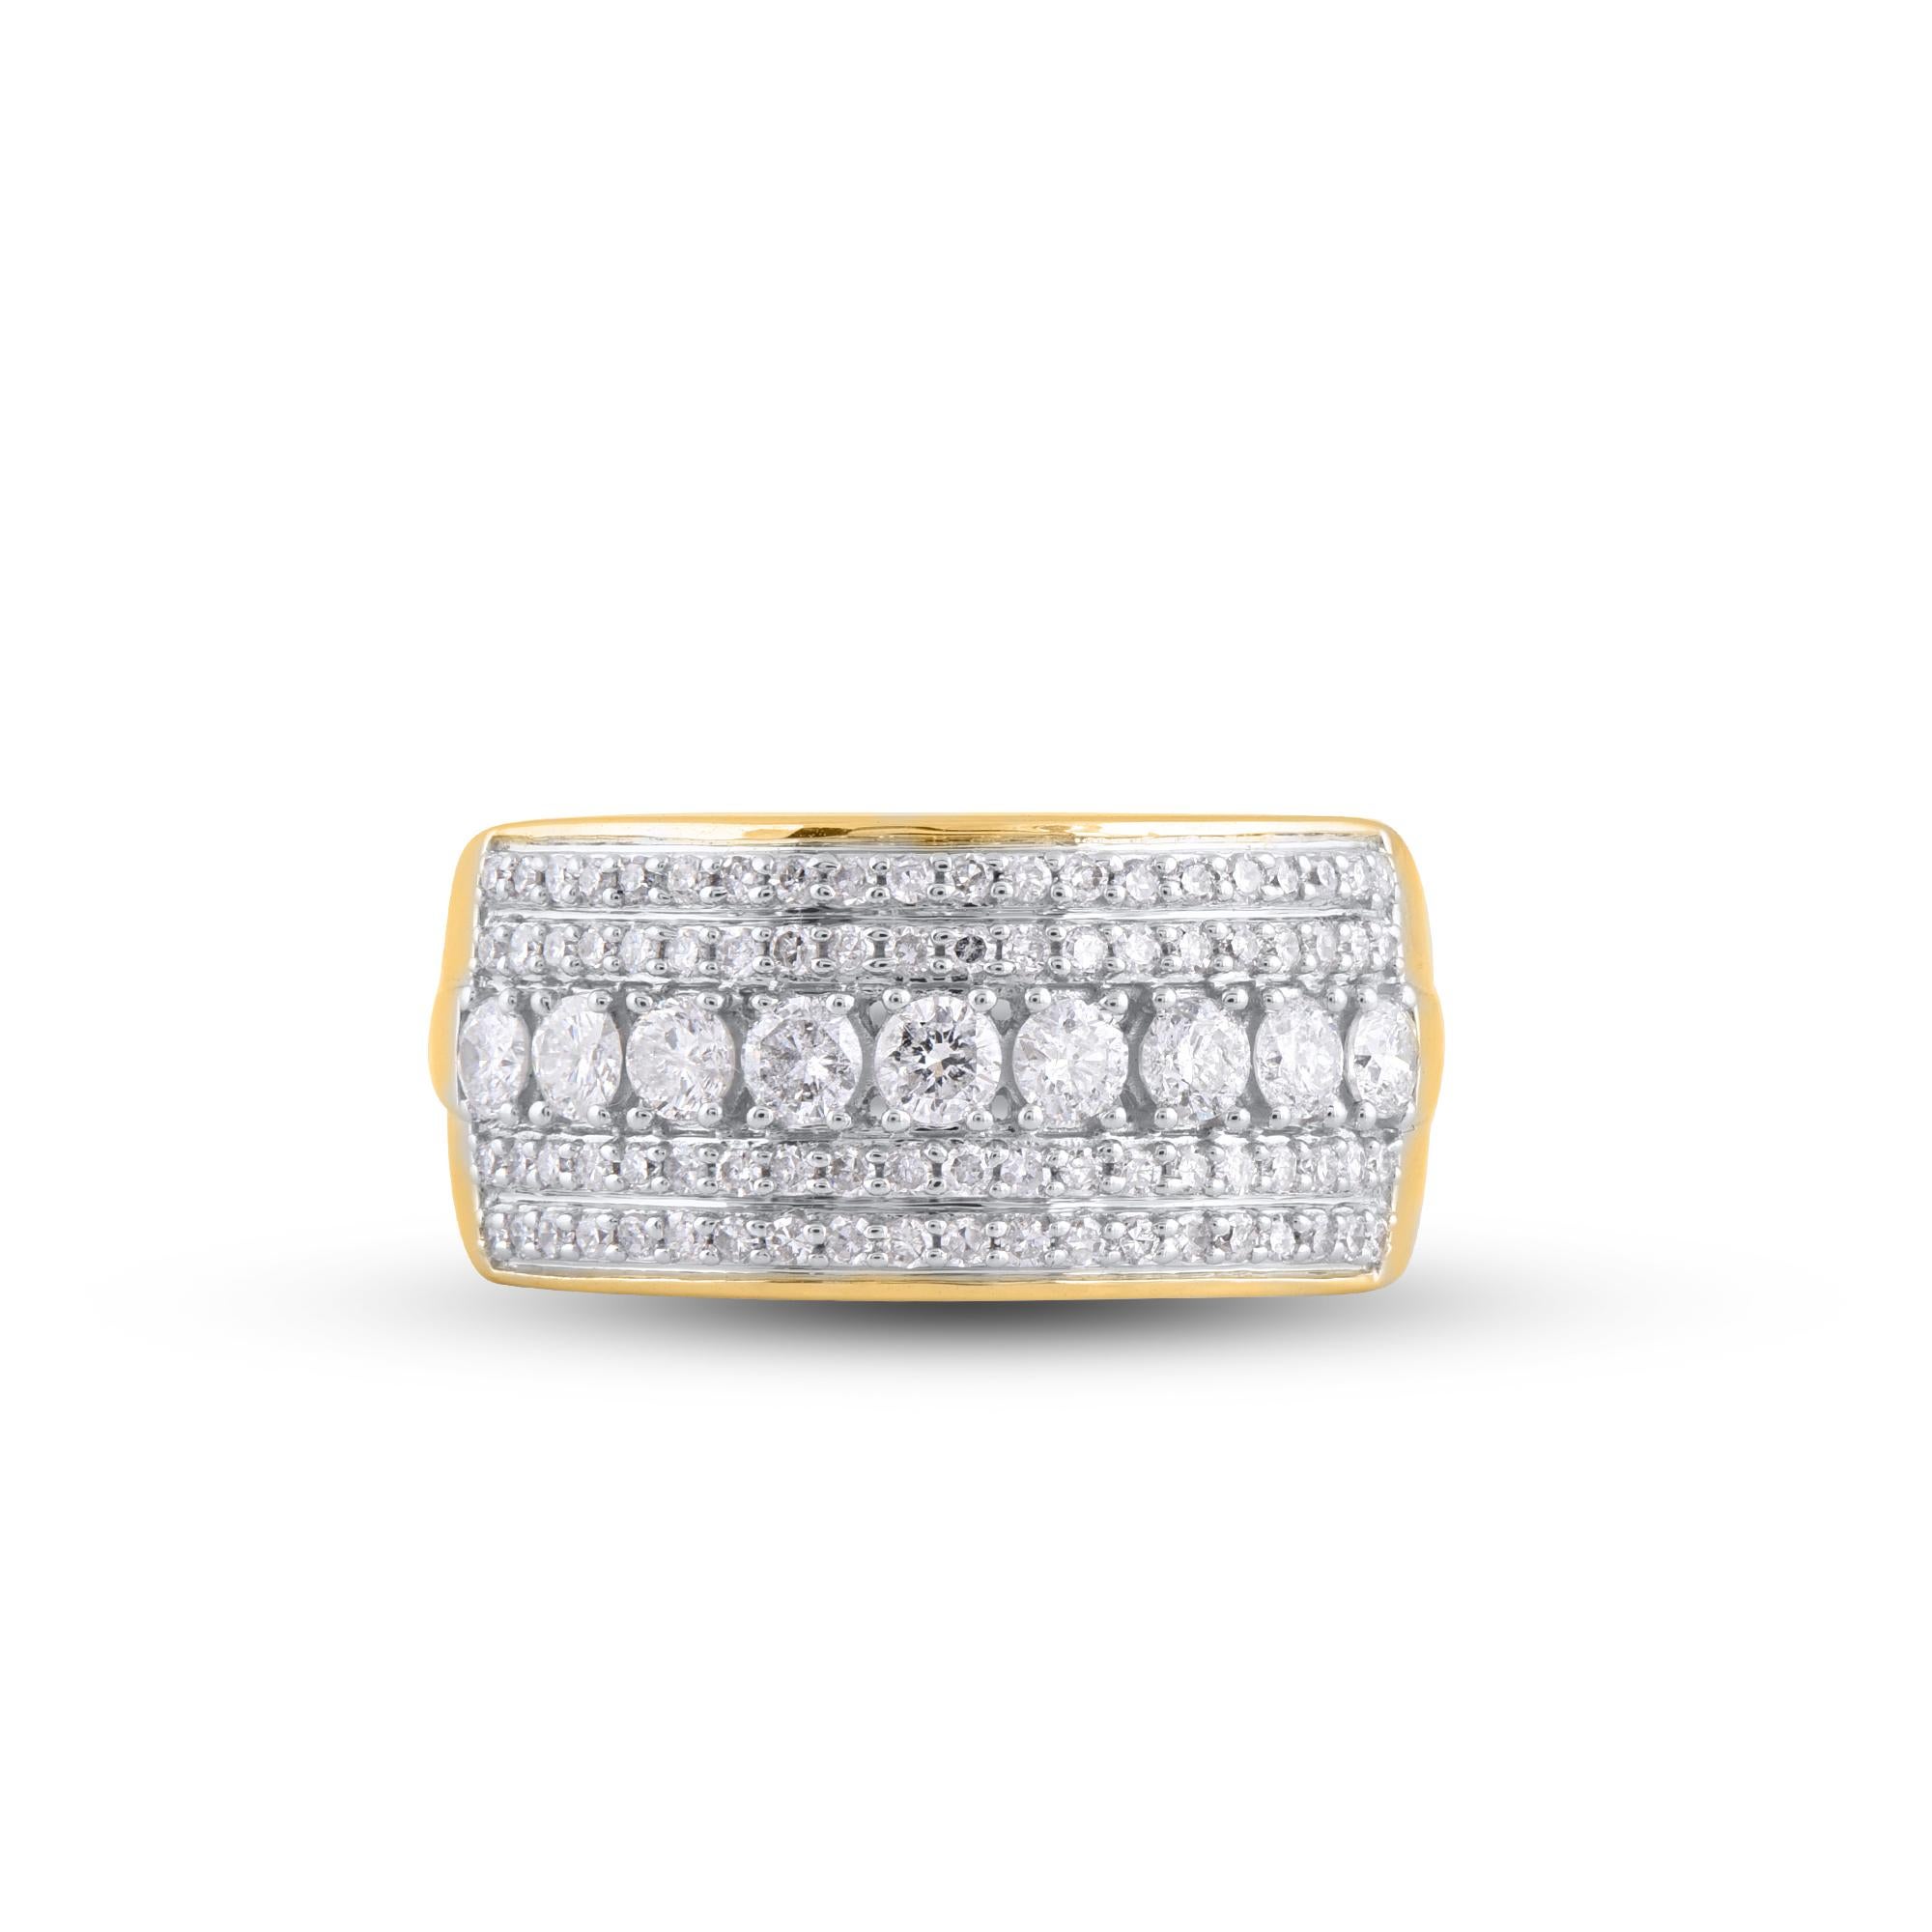 Honor your special day with this exceptional diamond band ring. This band ring features a sparkling 89 brilliant cut & single cut diamonds beautifully set in prong setting. The total diamond weight is 1.0 Carat. The diamonds are graded as H-I color